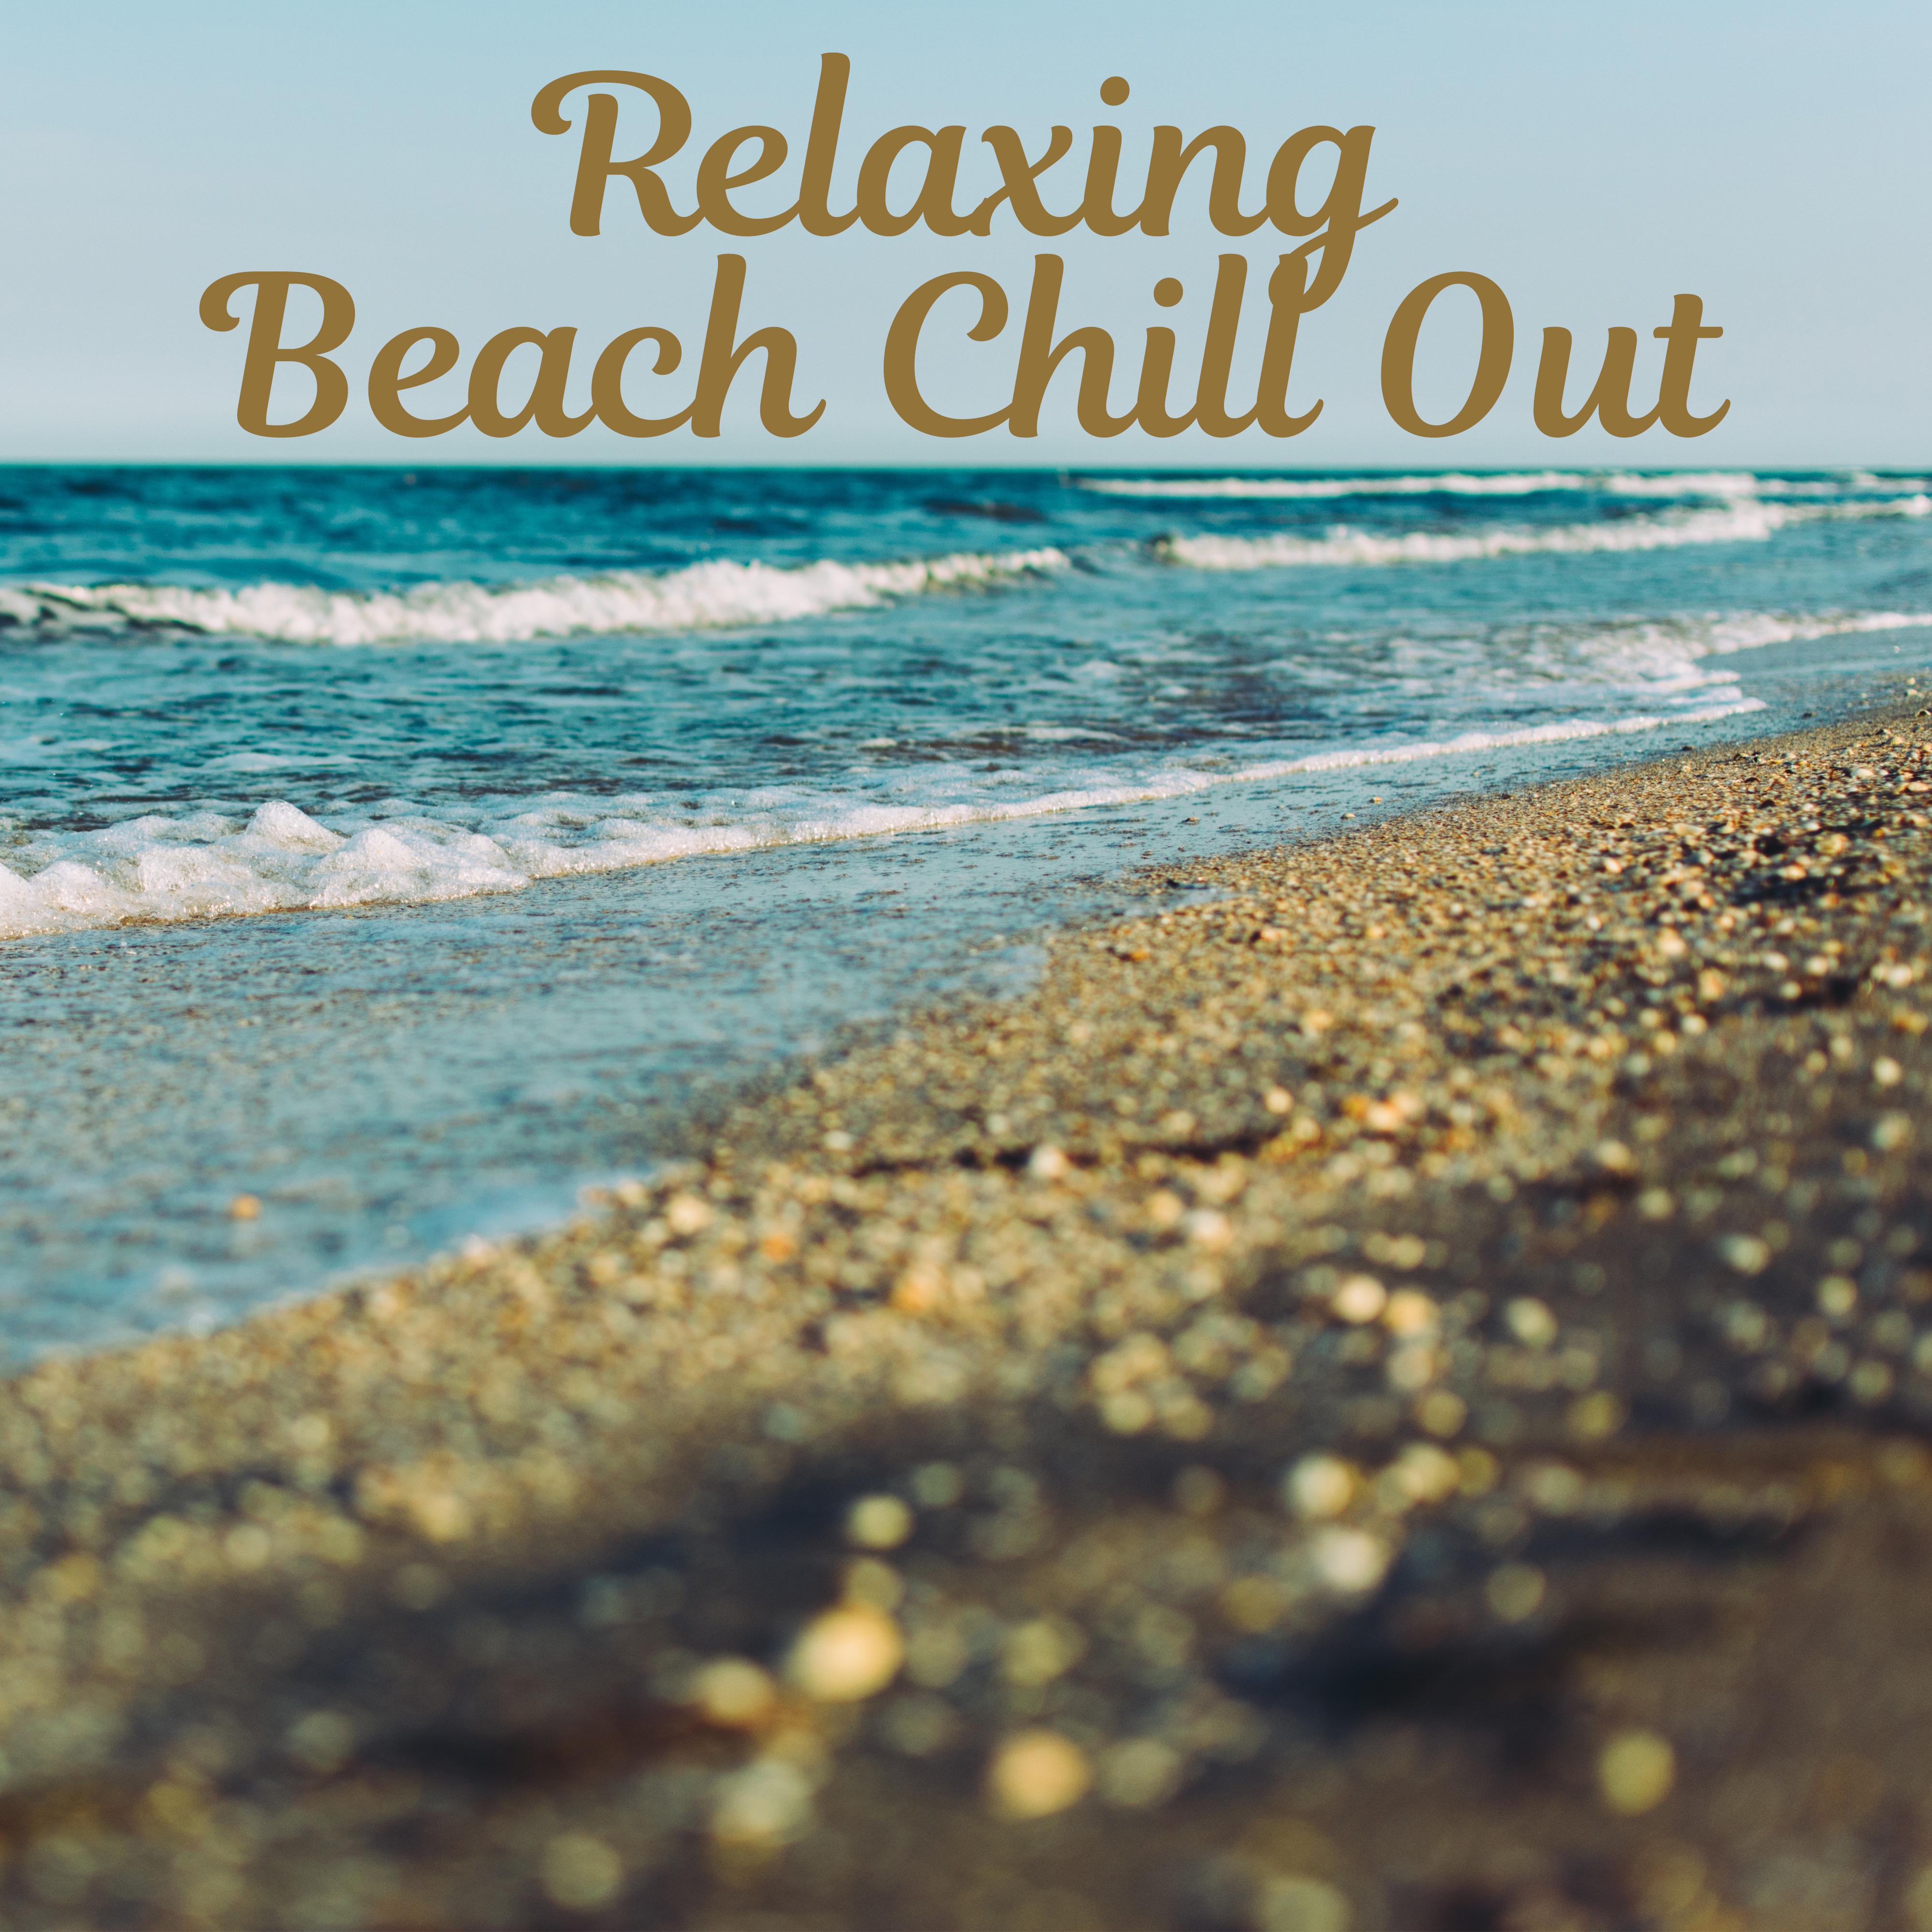 Relaxing Beach Chill Out – Soft Sounds to Relax, Chilled Music, Rest Music, Beach Lounge